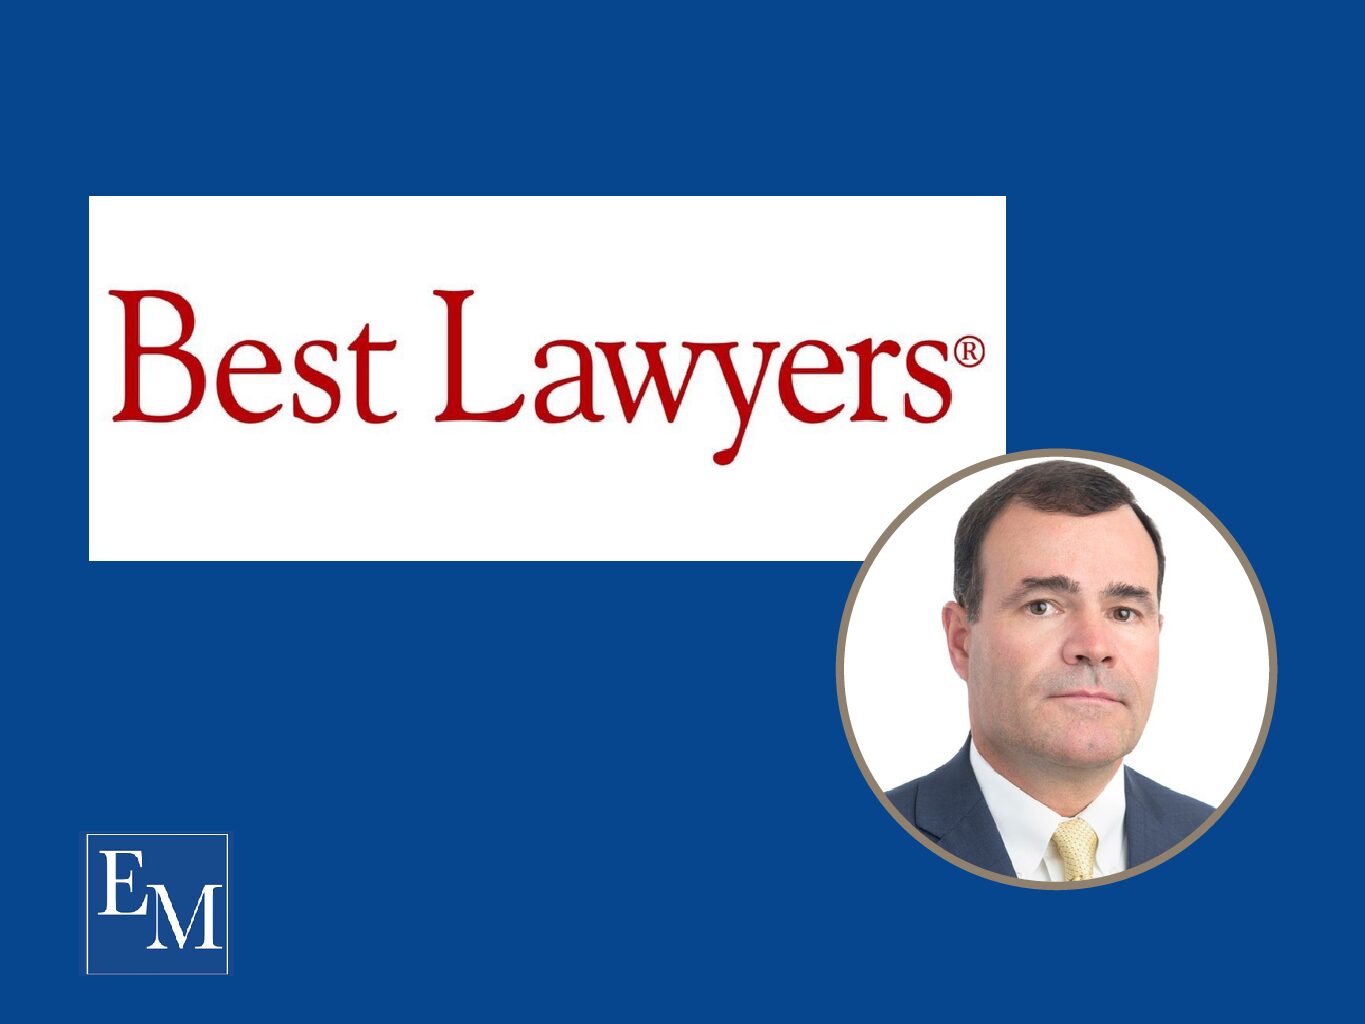 Reuben N. Pelot named 2021 Best Lawyers “Lawyer of the Year” in the Knoxville area.